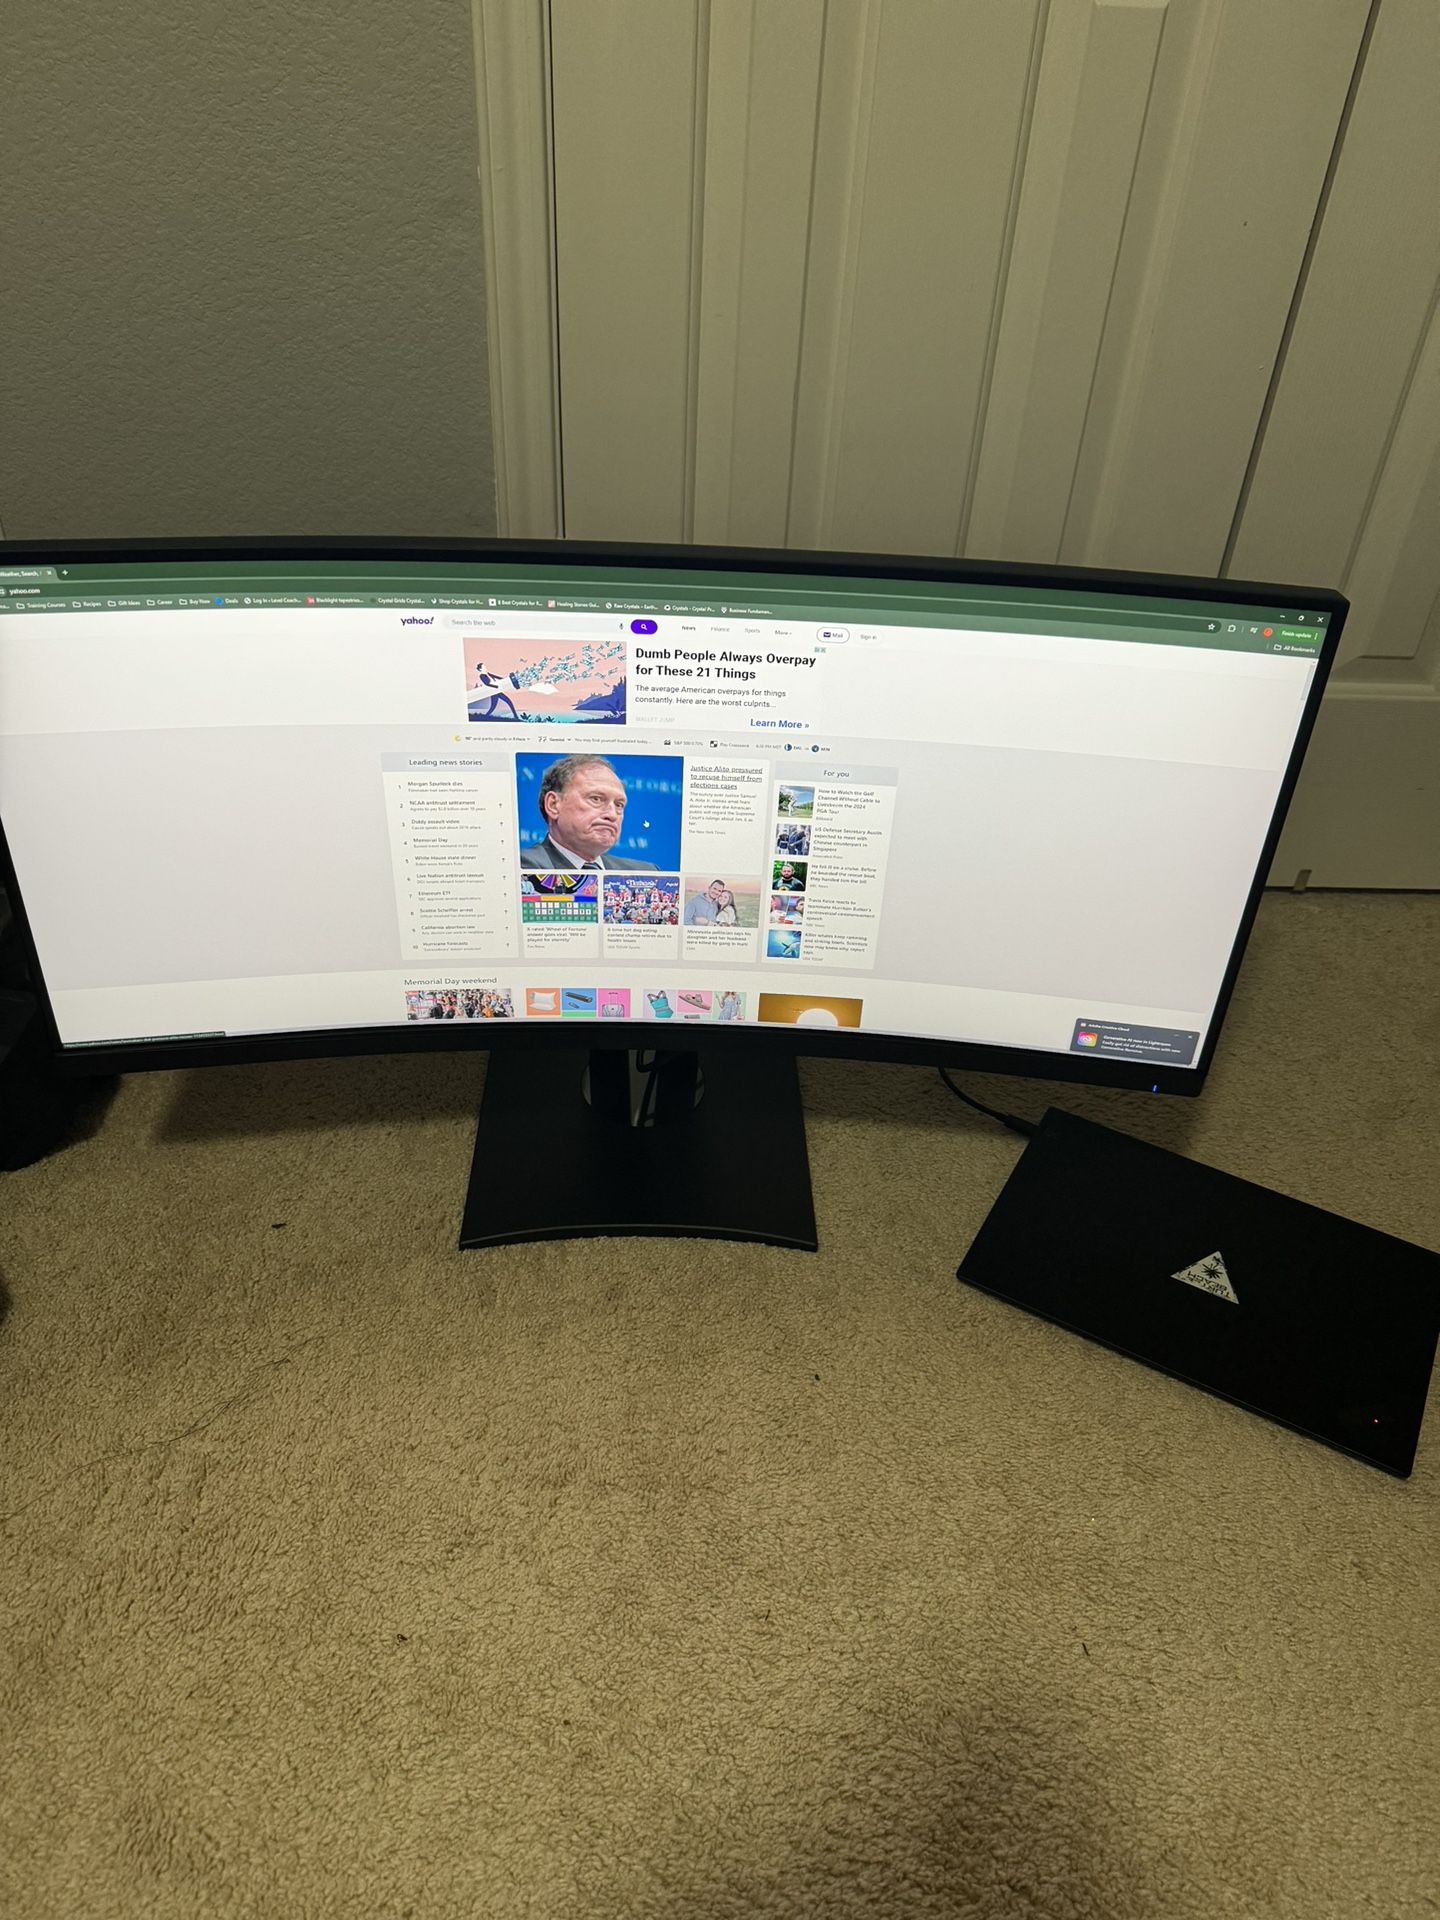 34” Curved ViewSonic VP3456A Dock Monitor w/ Ethernet, USB C and 100w power delivery